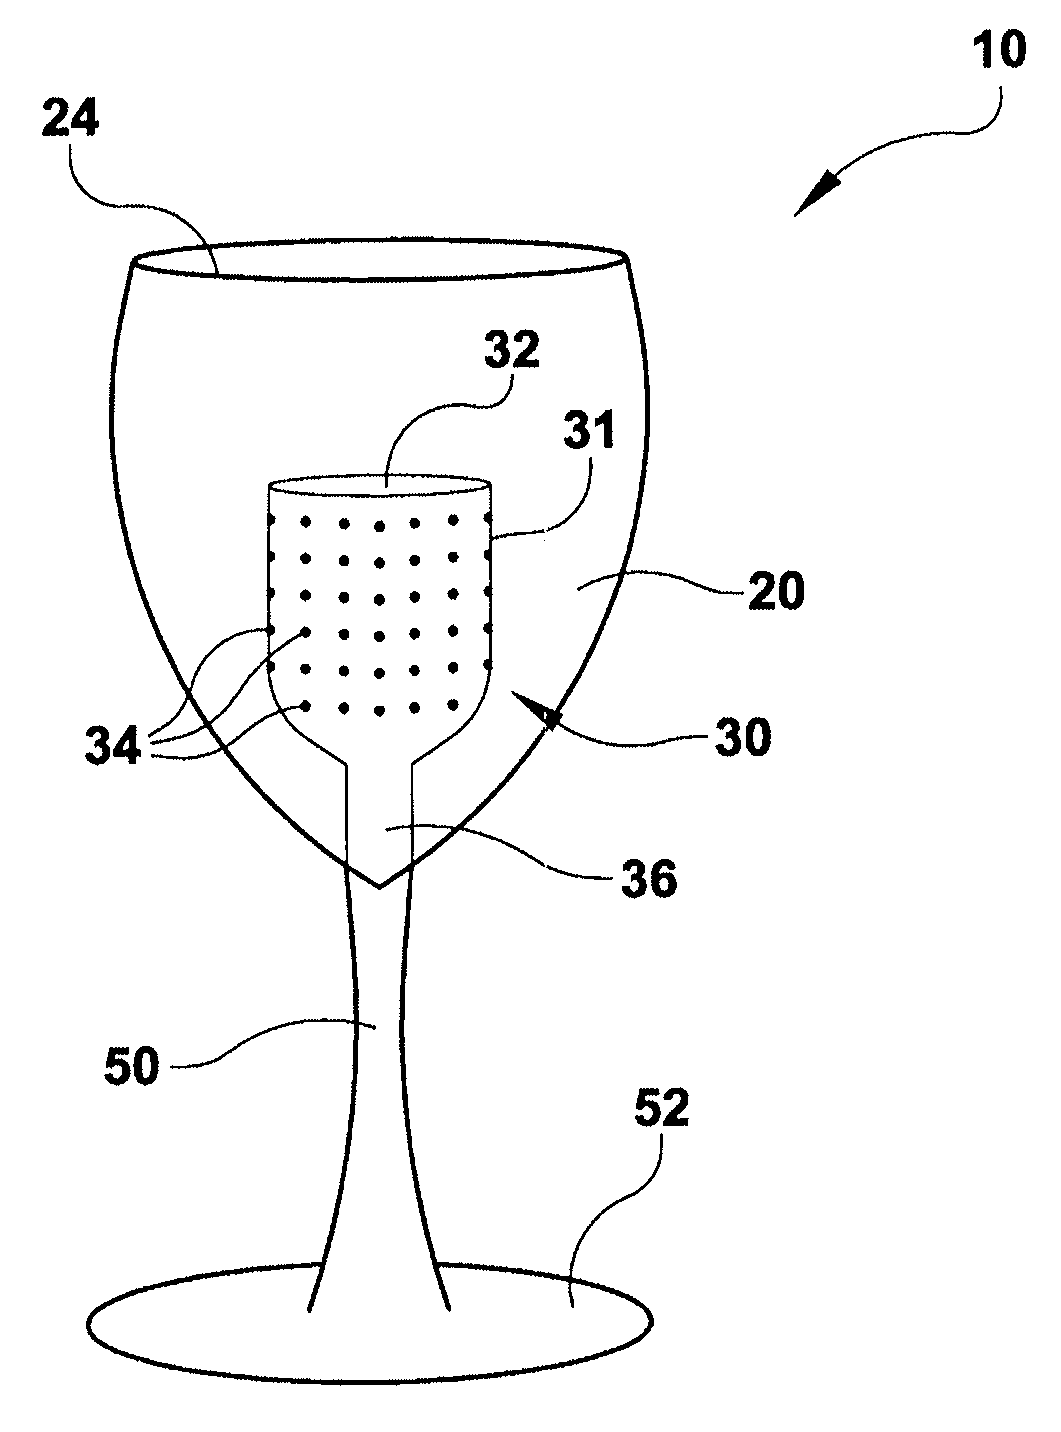 Beverage glass with internal decanting, filtering, mixing and aerating cell